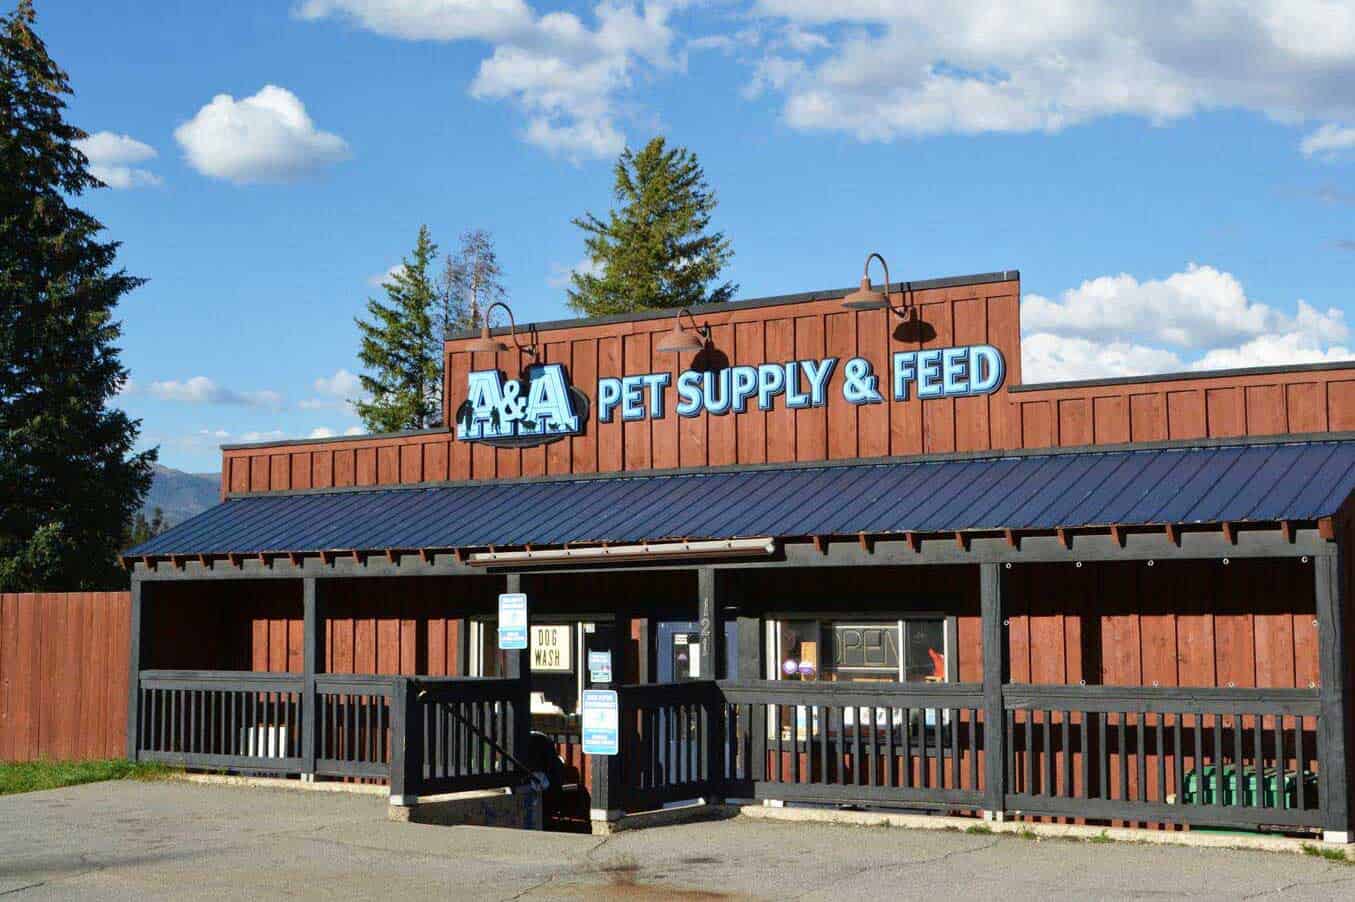 A&A Pet Supply storefront in Frisco, CO